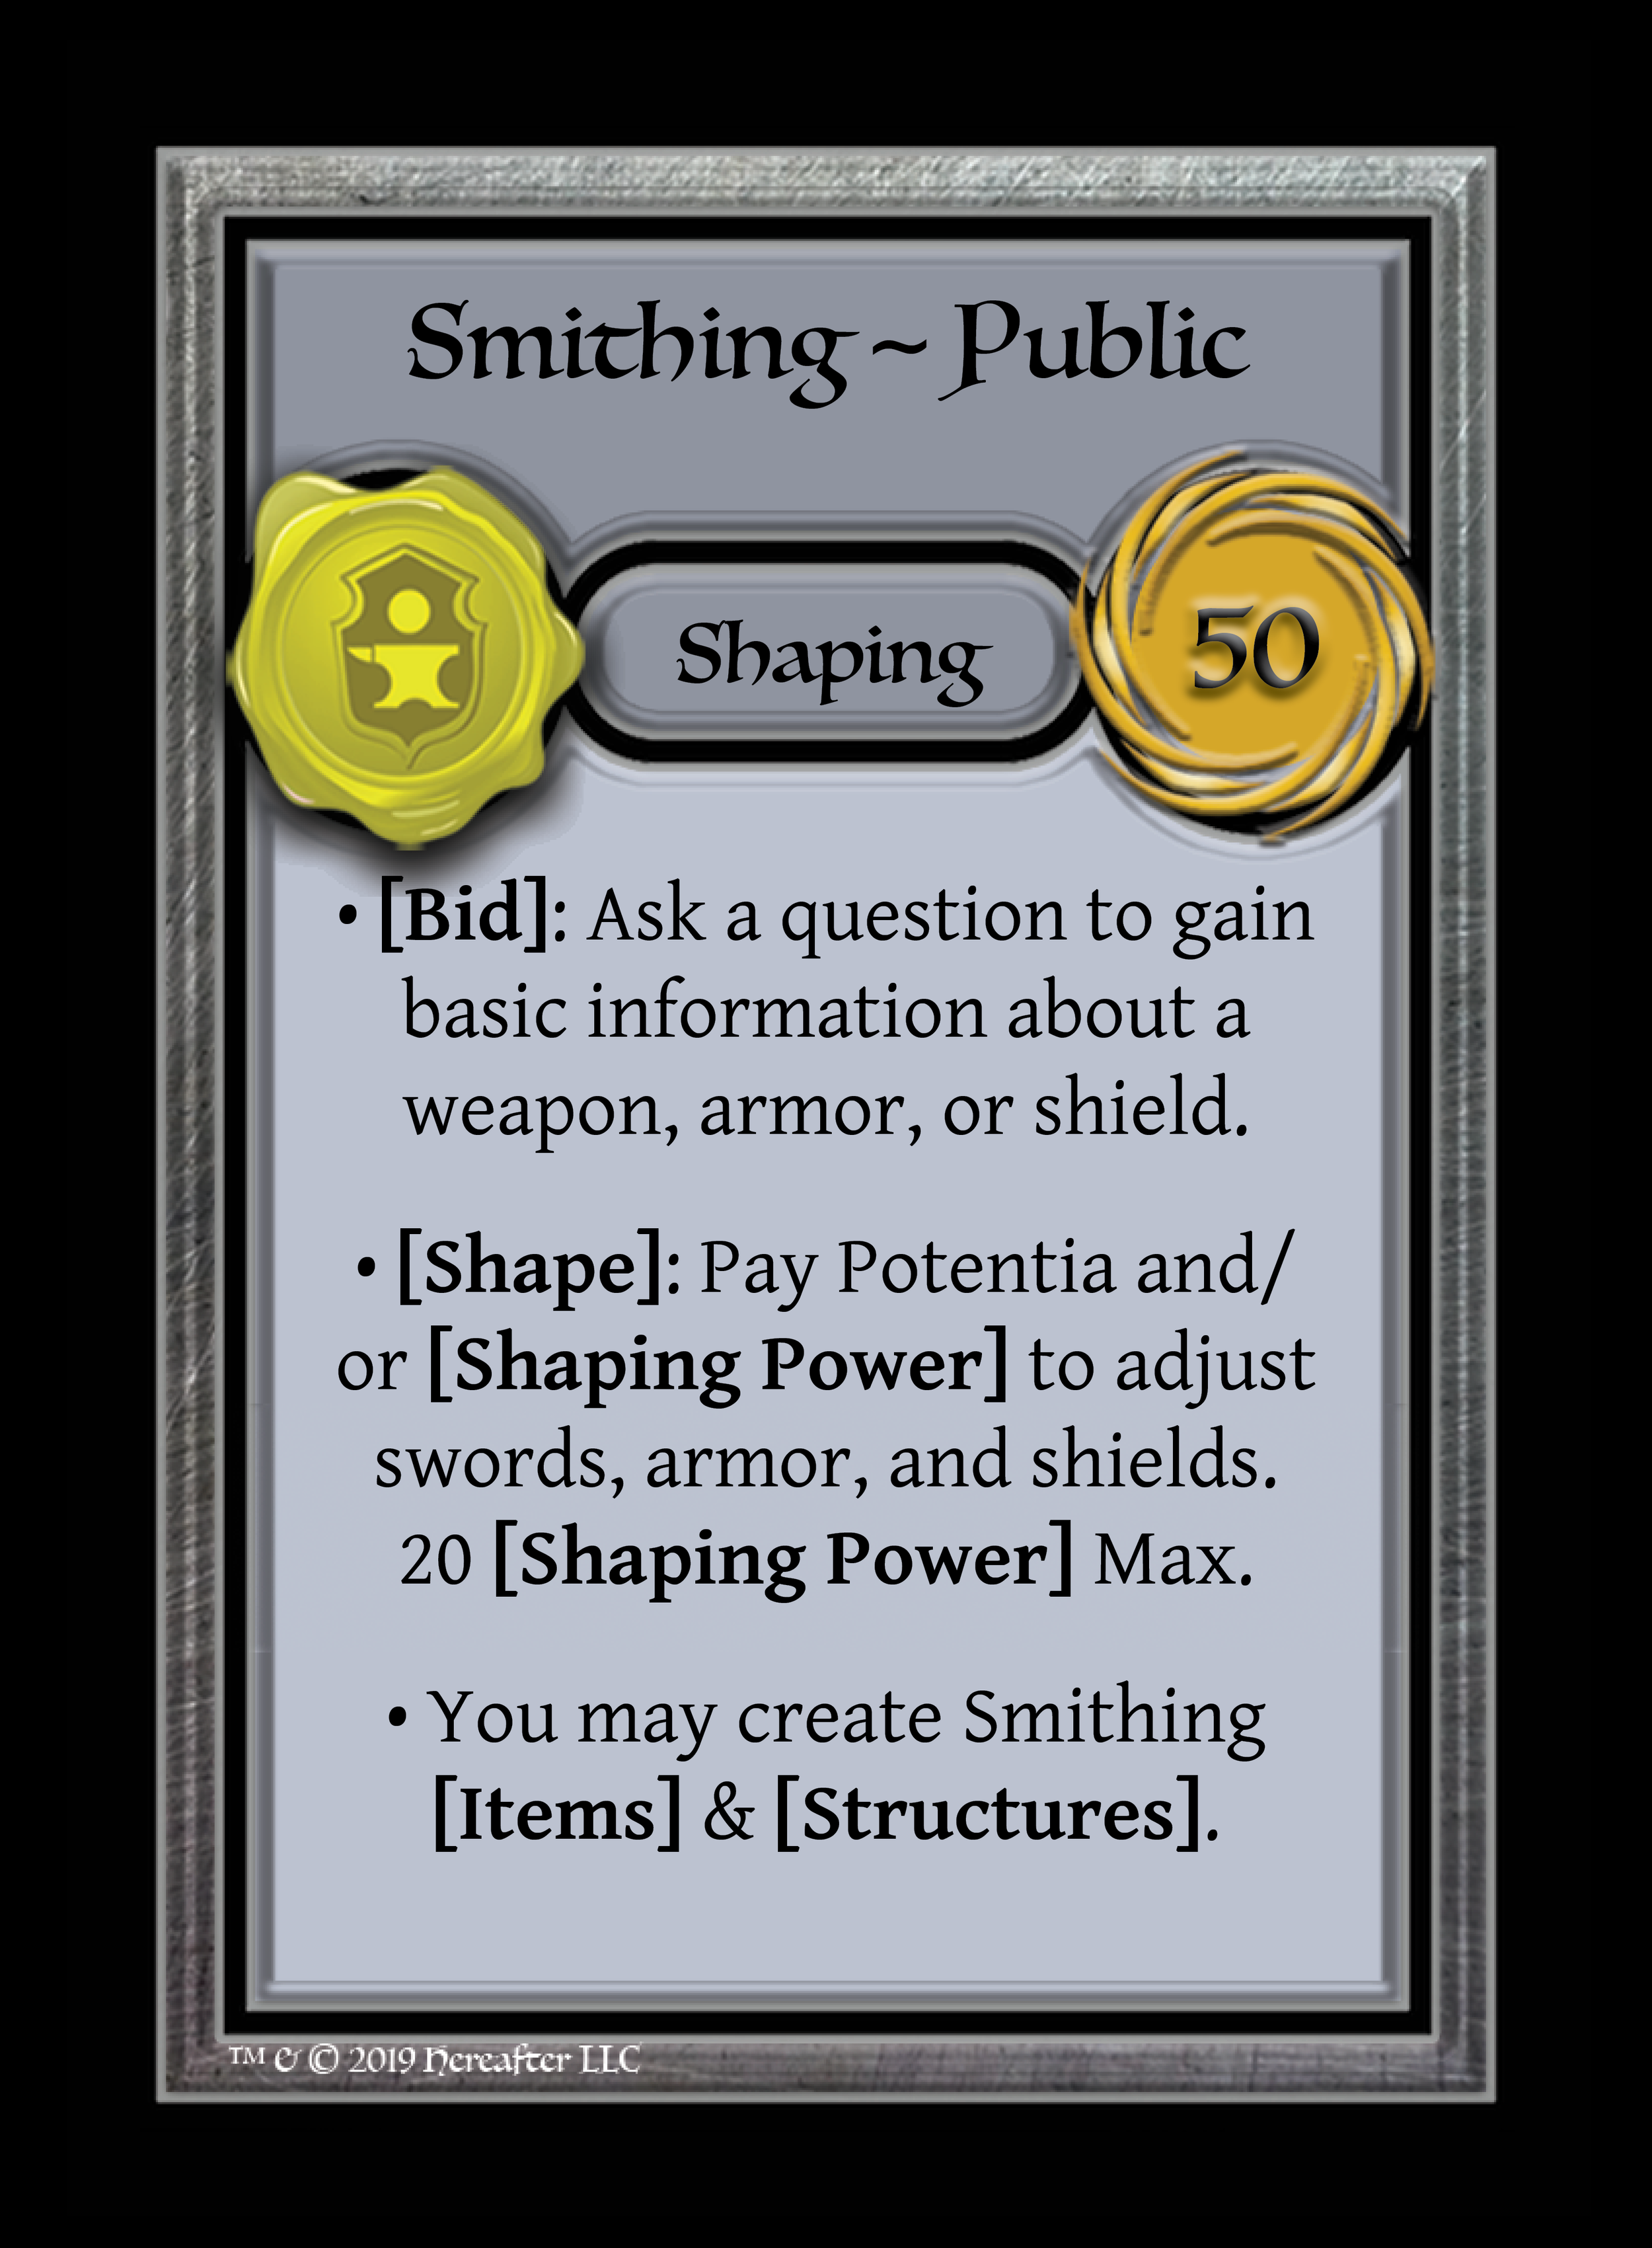 253_Shaping_Smithing ~ Public_().png